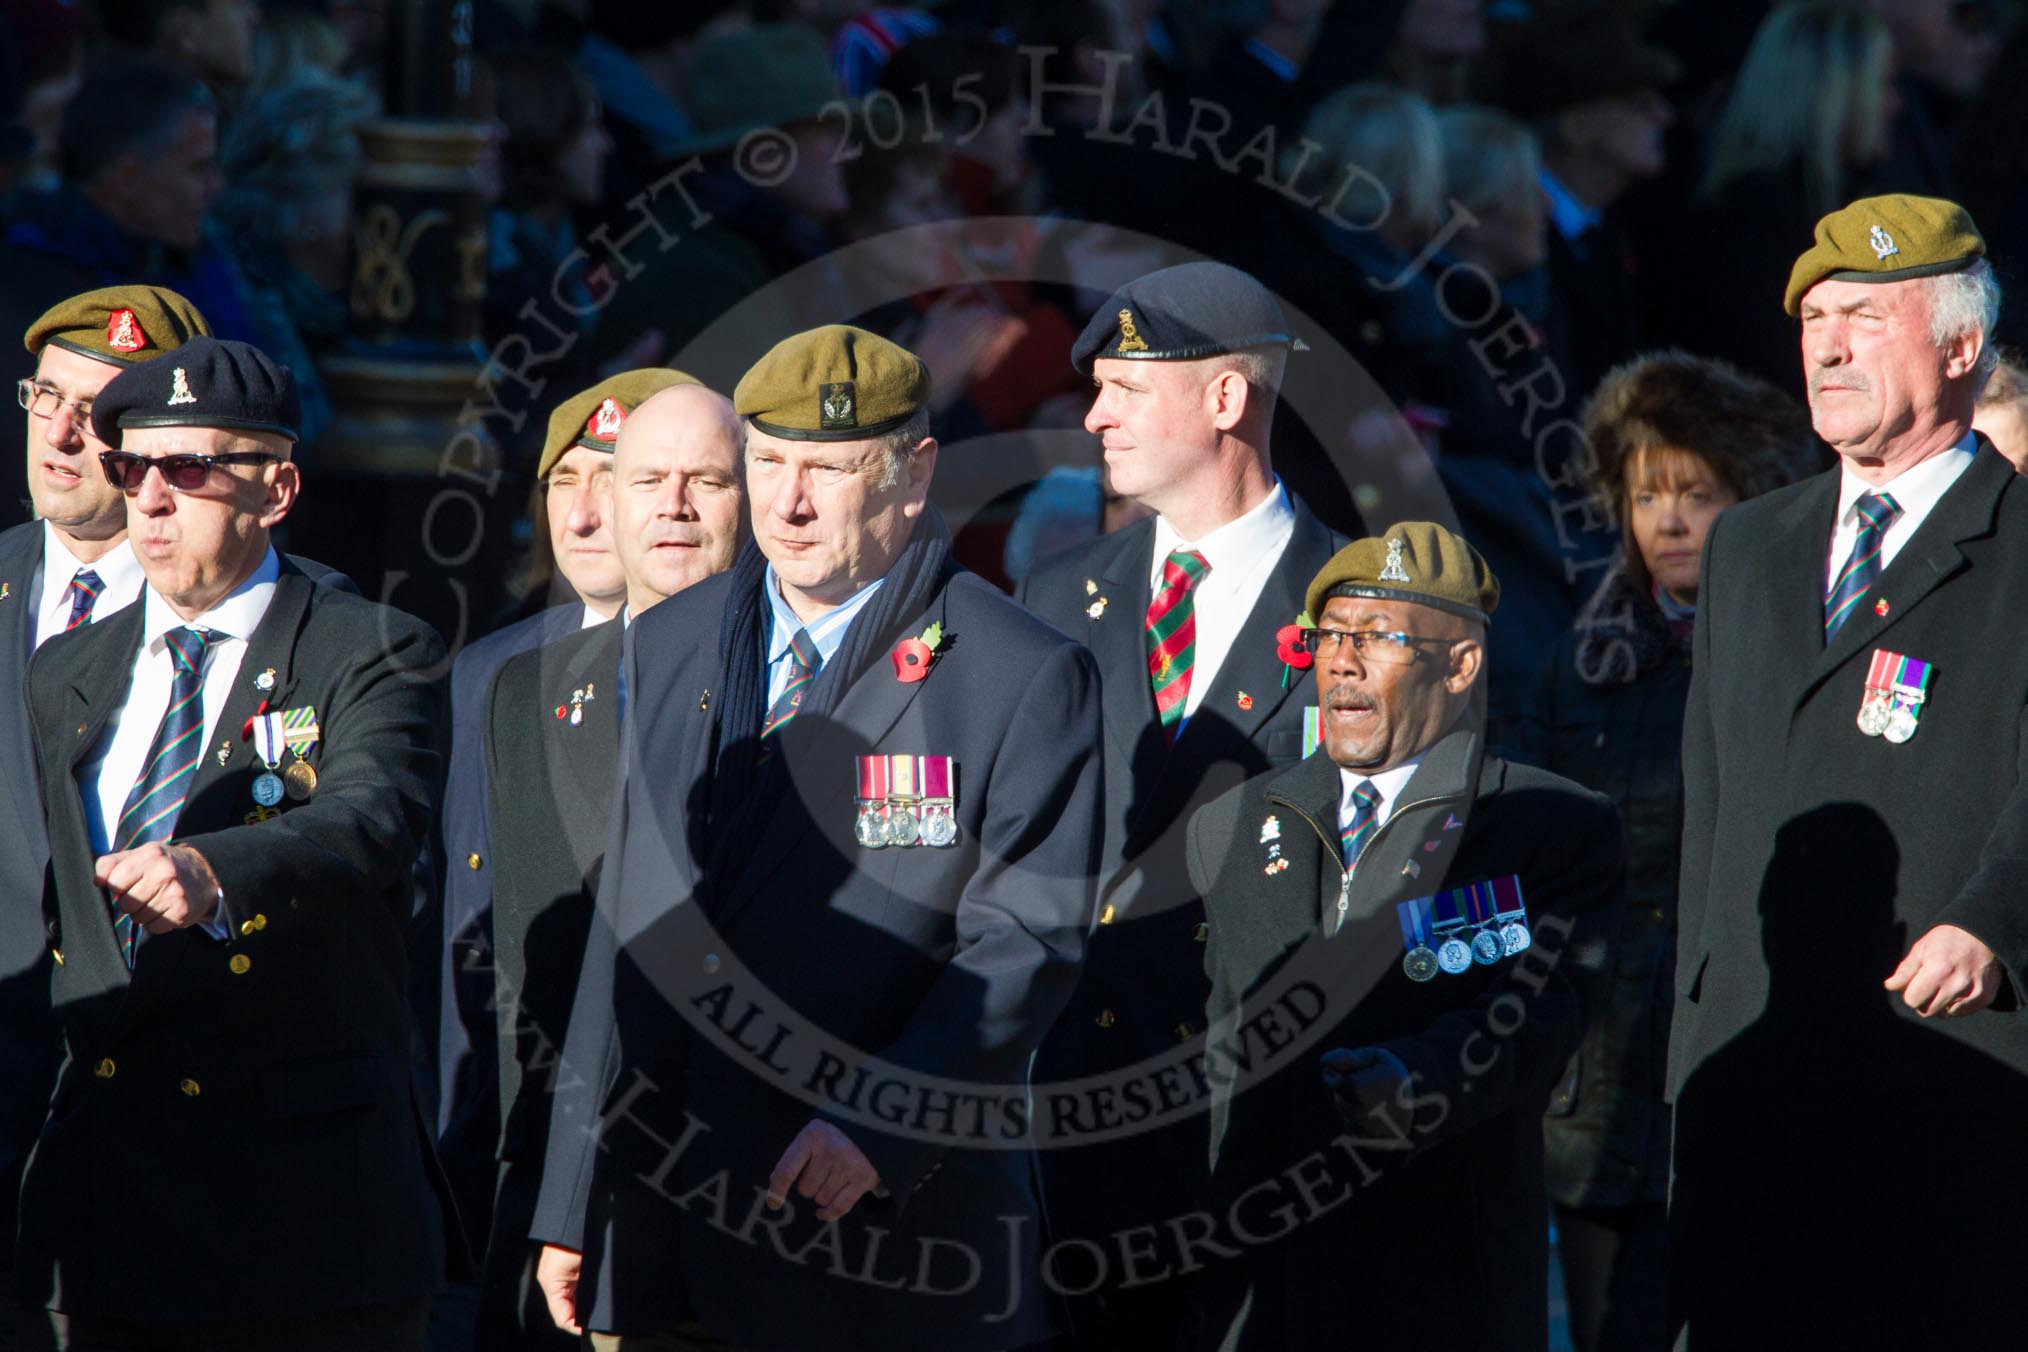 Remembrance Sunday Cenotaph March Past 2013: B29 - Royal Pioneer Corps Association..
Press stand opposite the Foreign Office building, Whitehall, London SW1,
London,
Greater London,
United Kingdom,
on 10 November 2013 at 12:03, image #1562